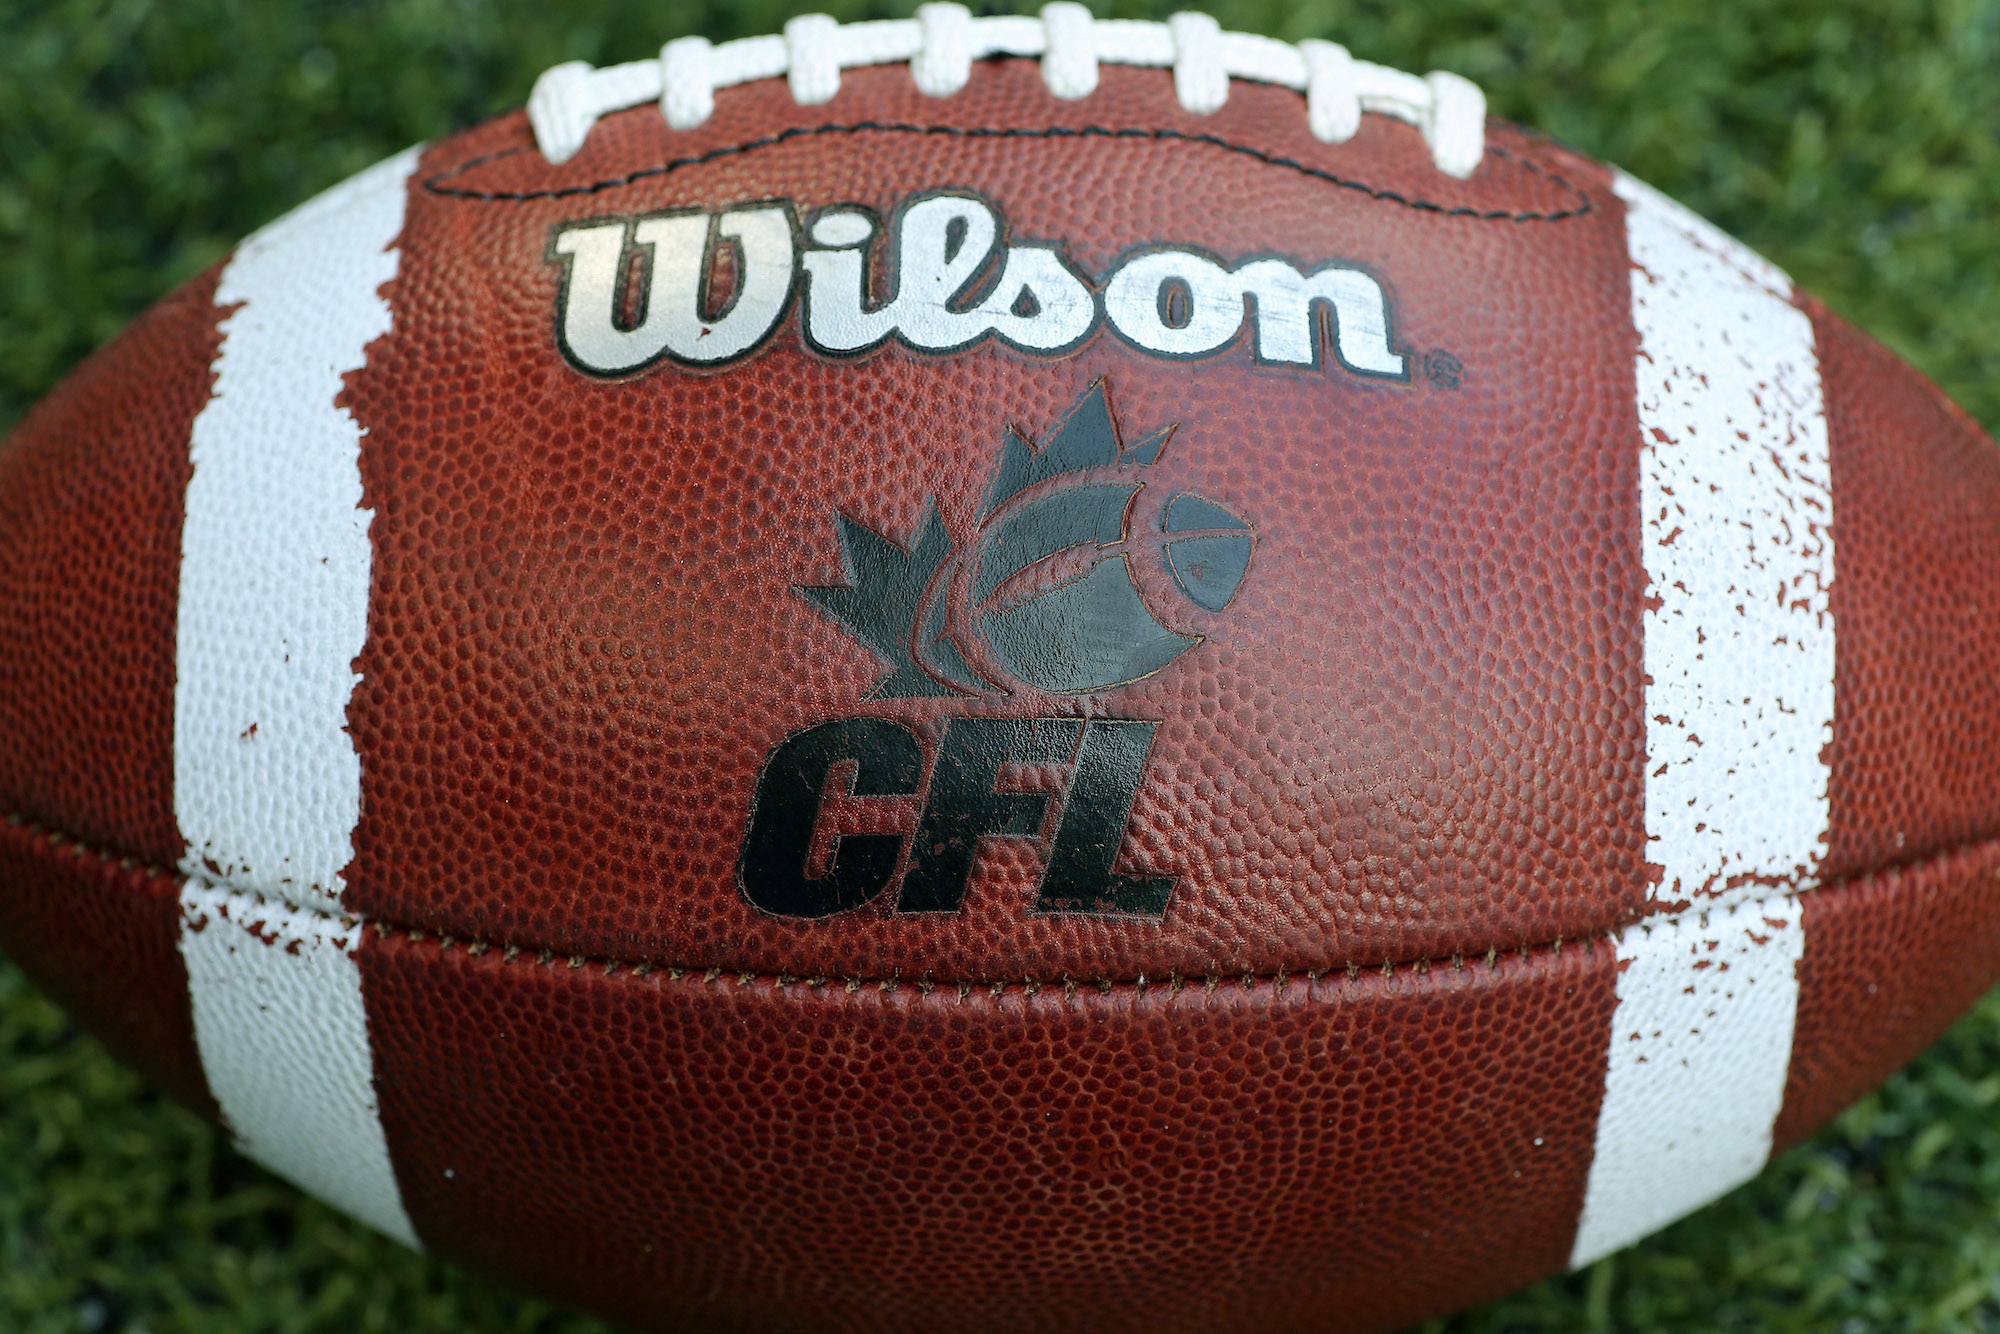 TORONTO, CANADA - JULY 11: A CFL logo on an official Canadian CFL league ball during warm-ups before the Saskatchewan Roughriders CFL game against the Toronto Argonauts on July 11, 2013 at Rogers Centre in Toronto, Ontario, Canada. (Photo by Tom Szczerbowski/Getty Images)